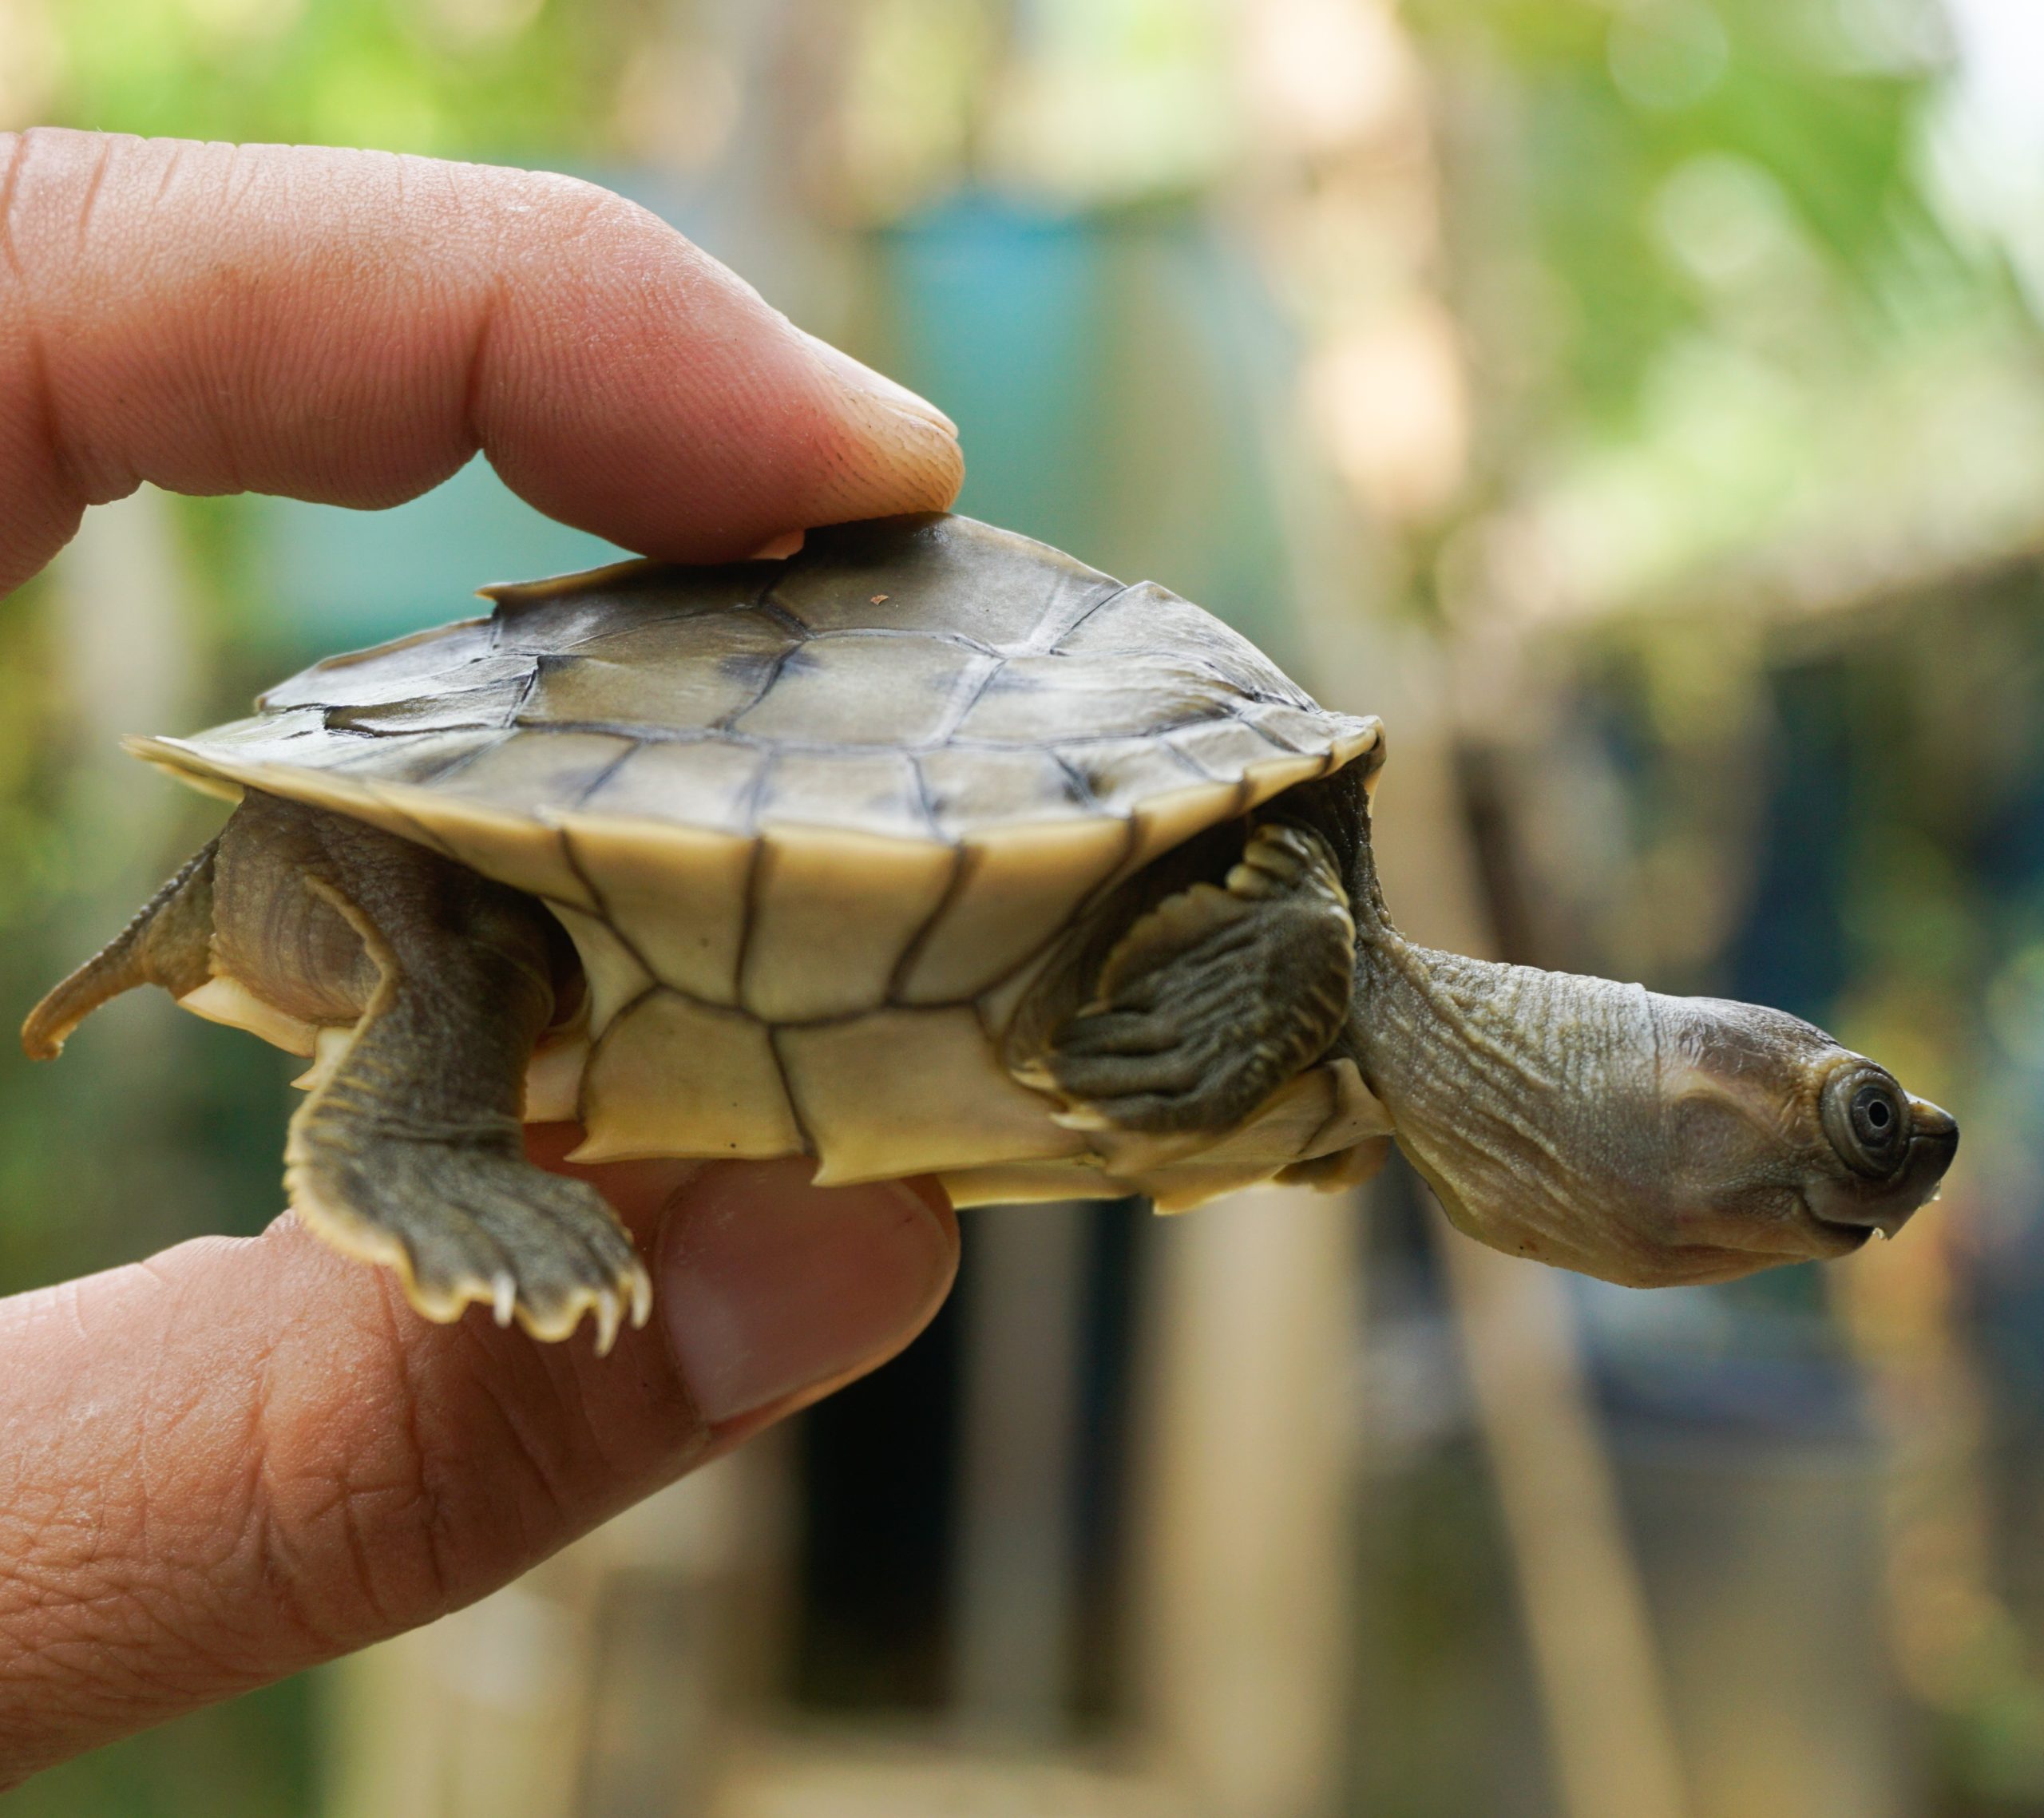 The sharp rearward pointing spines on the bony ridge of the Burmese roofed turtle’s shell become blunt by age three and disappear by age four. Photo by Myo Min Win (Platt et al 2020).